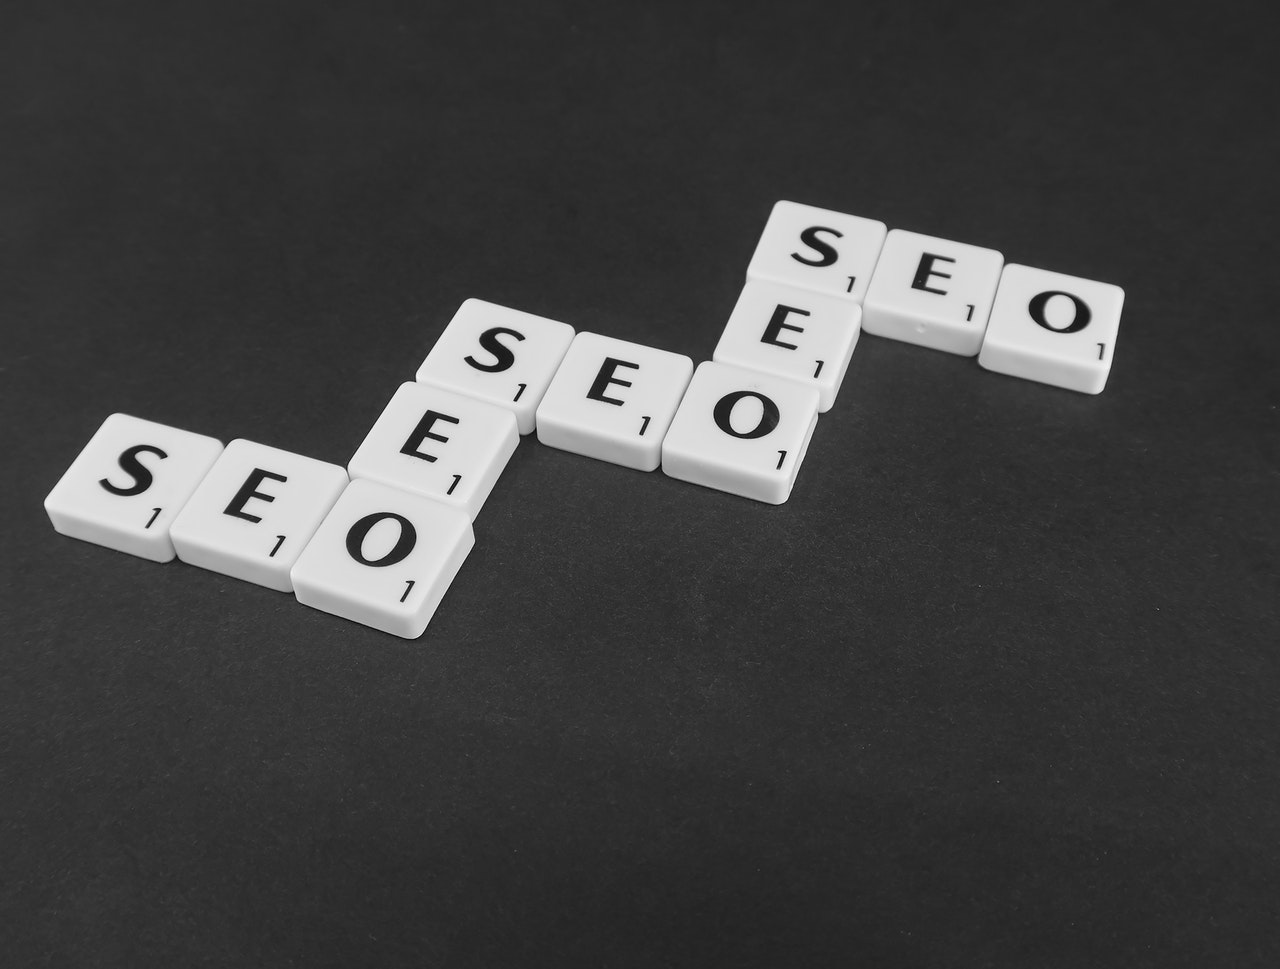 14 Benefits of Using SEO As a Business Marketing Strategy